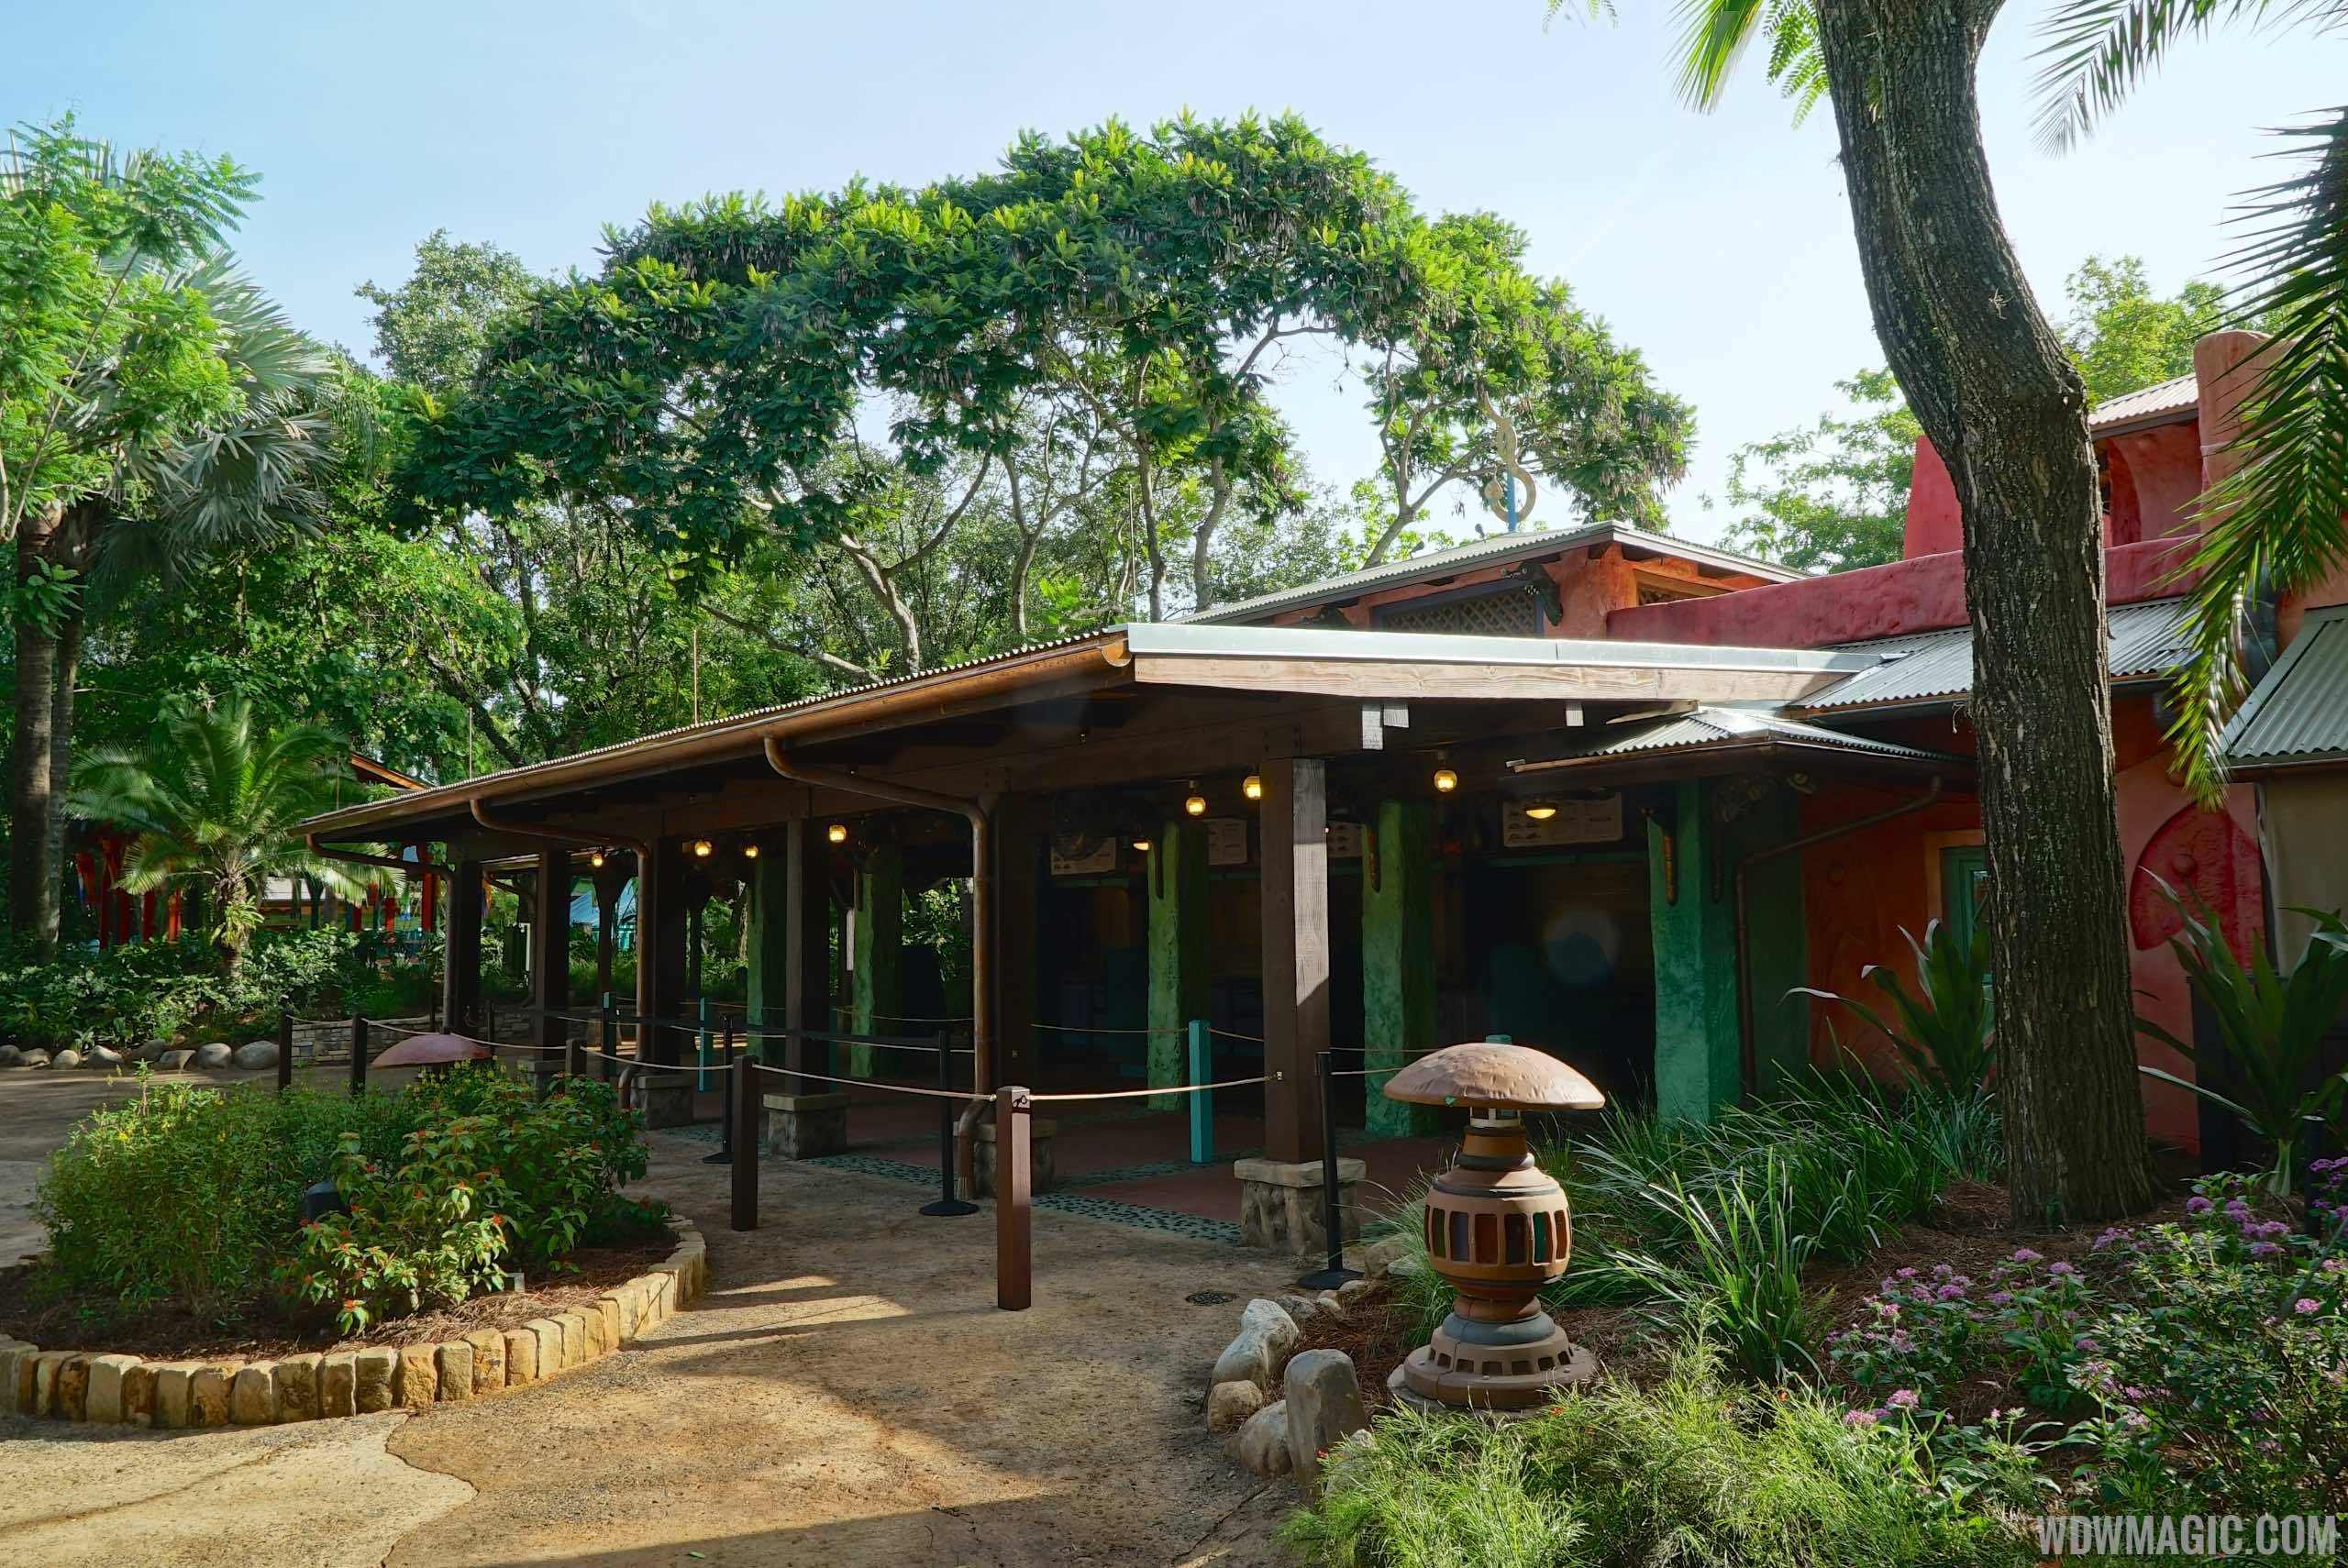 Flame Tree Barbecue now open after refurbishment